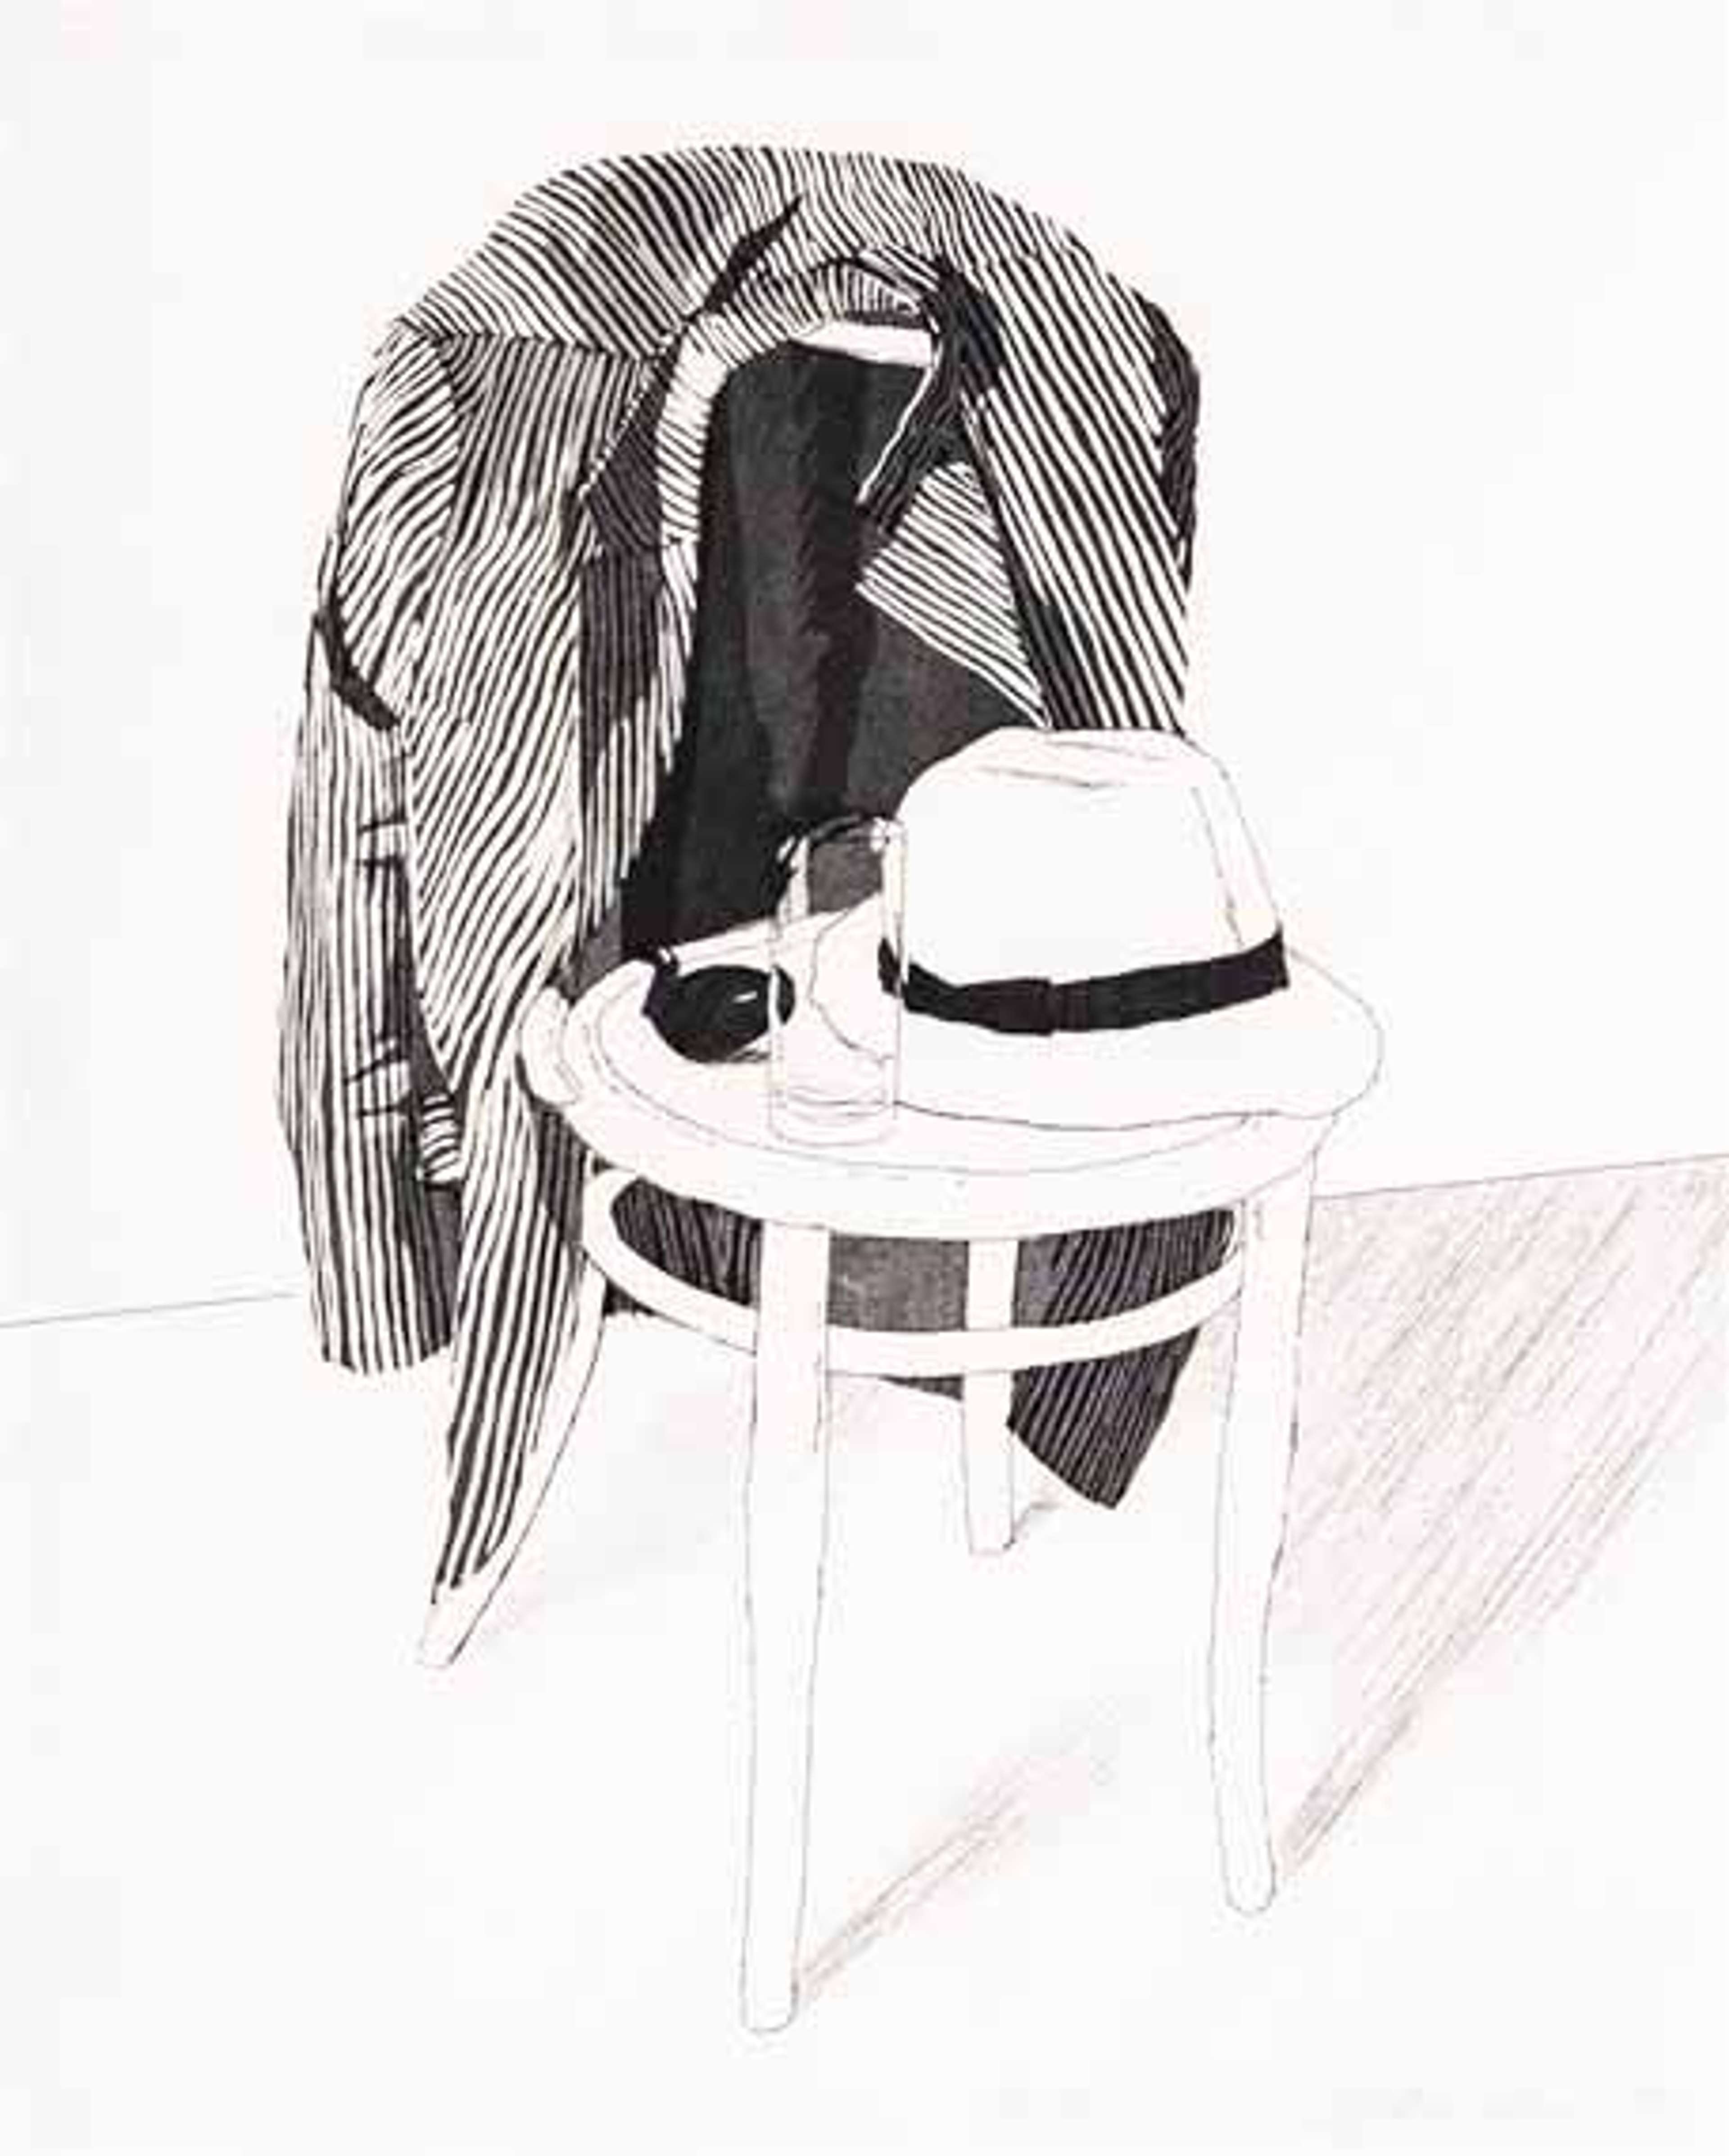 Panama Hat On A Chair With Jacket